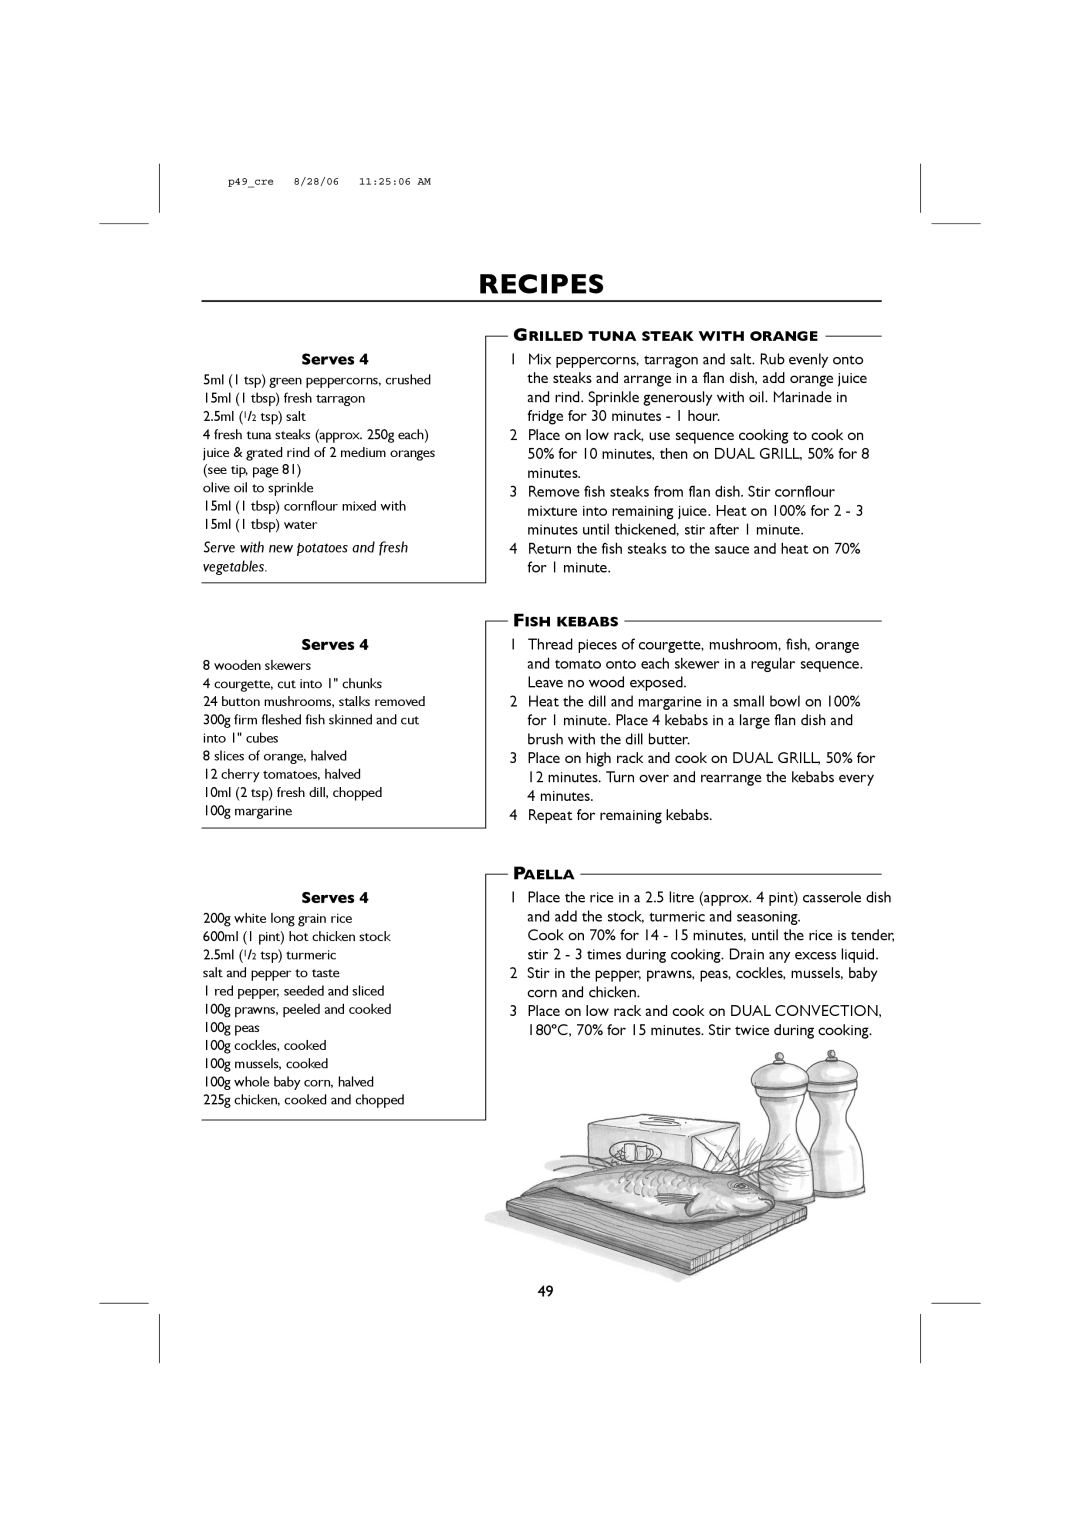 Sharp R-959M, R-98STM-A operation manual Serve with new potatoes and fresh vegetables, Recipes 